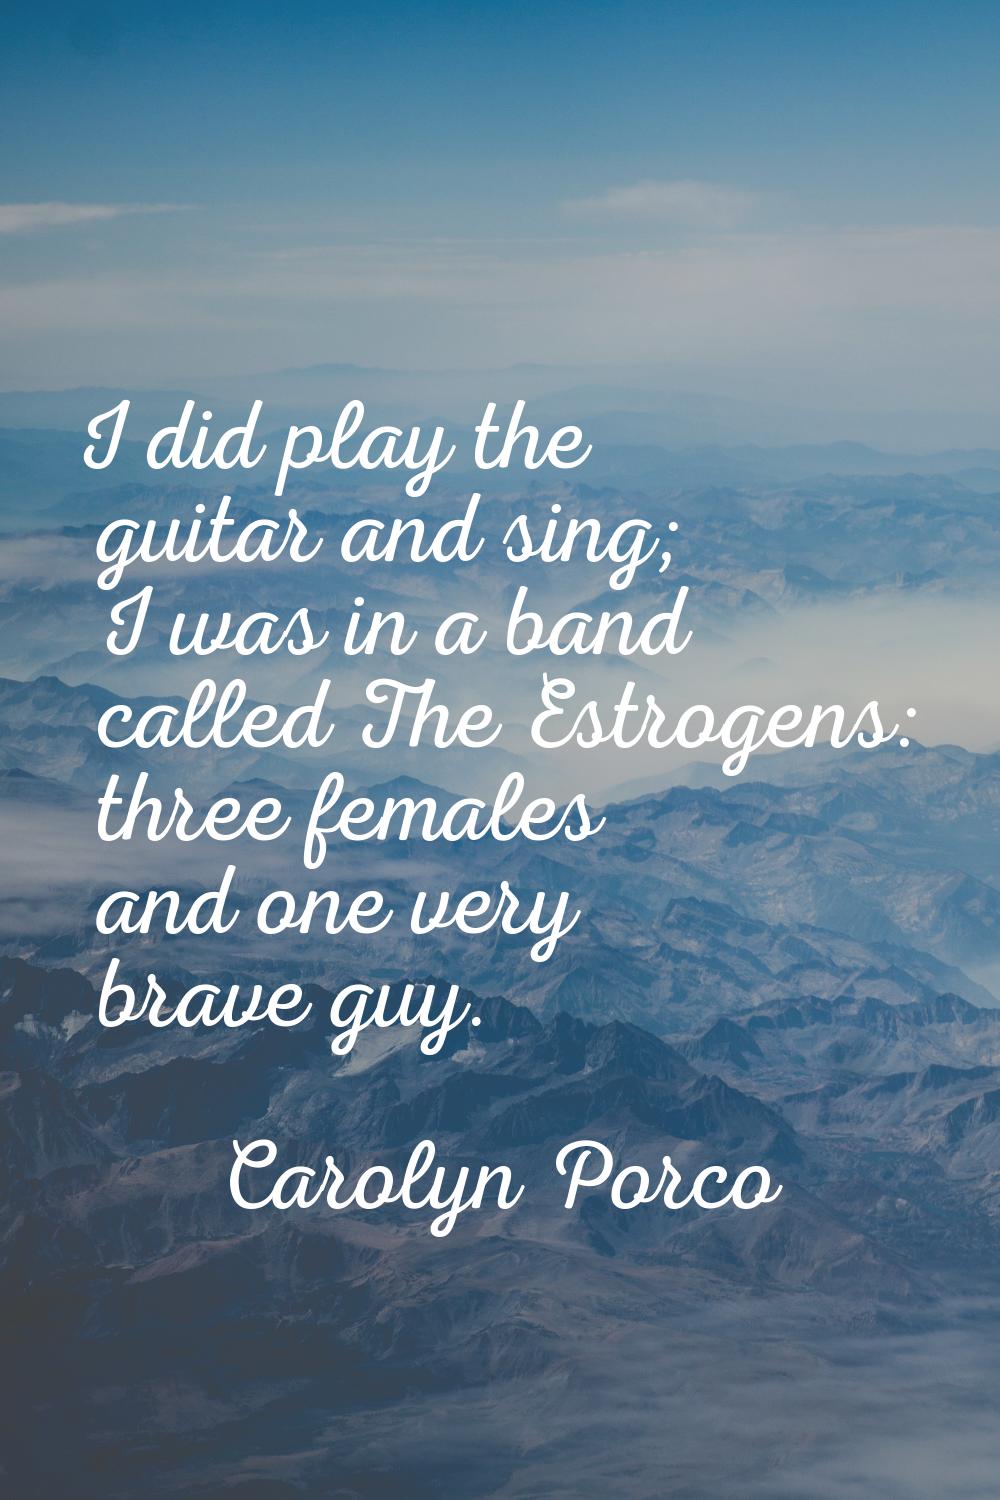 I did play the guitar and sing; I was in a band called The Estrogens: three females and one very br